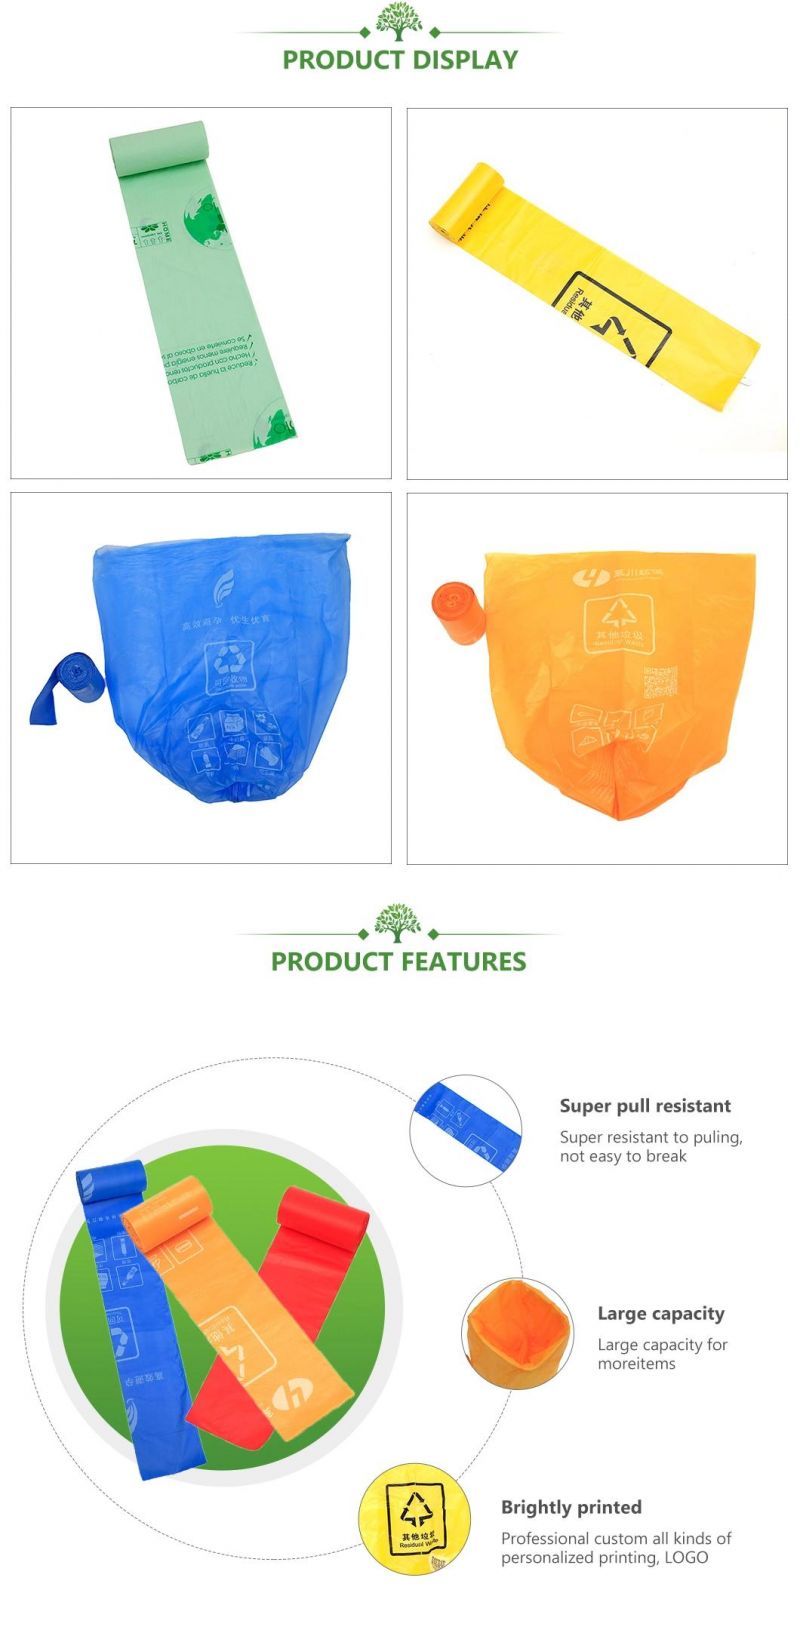 Biodegradable Bags Compostable Waste Bags Manufacturer with FDA, Brc, BSCI, CE, Grs, Bpi, Seeding